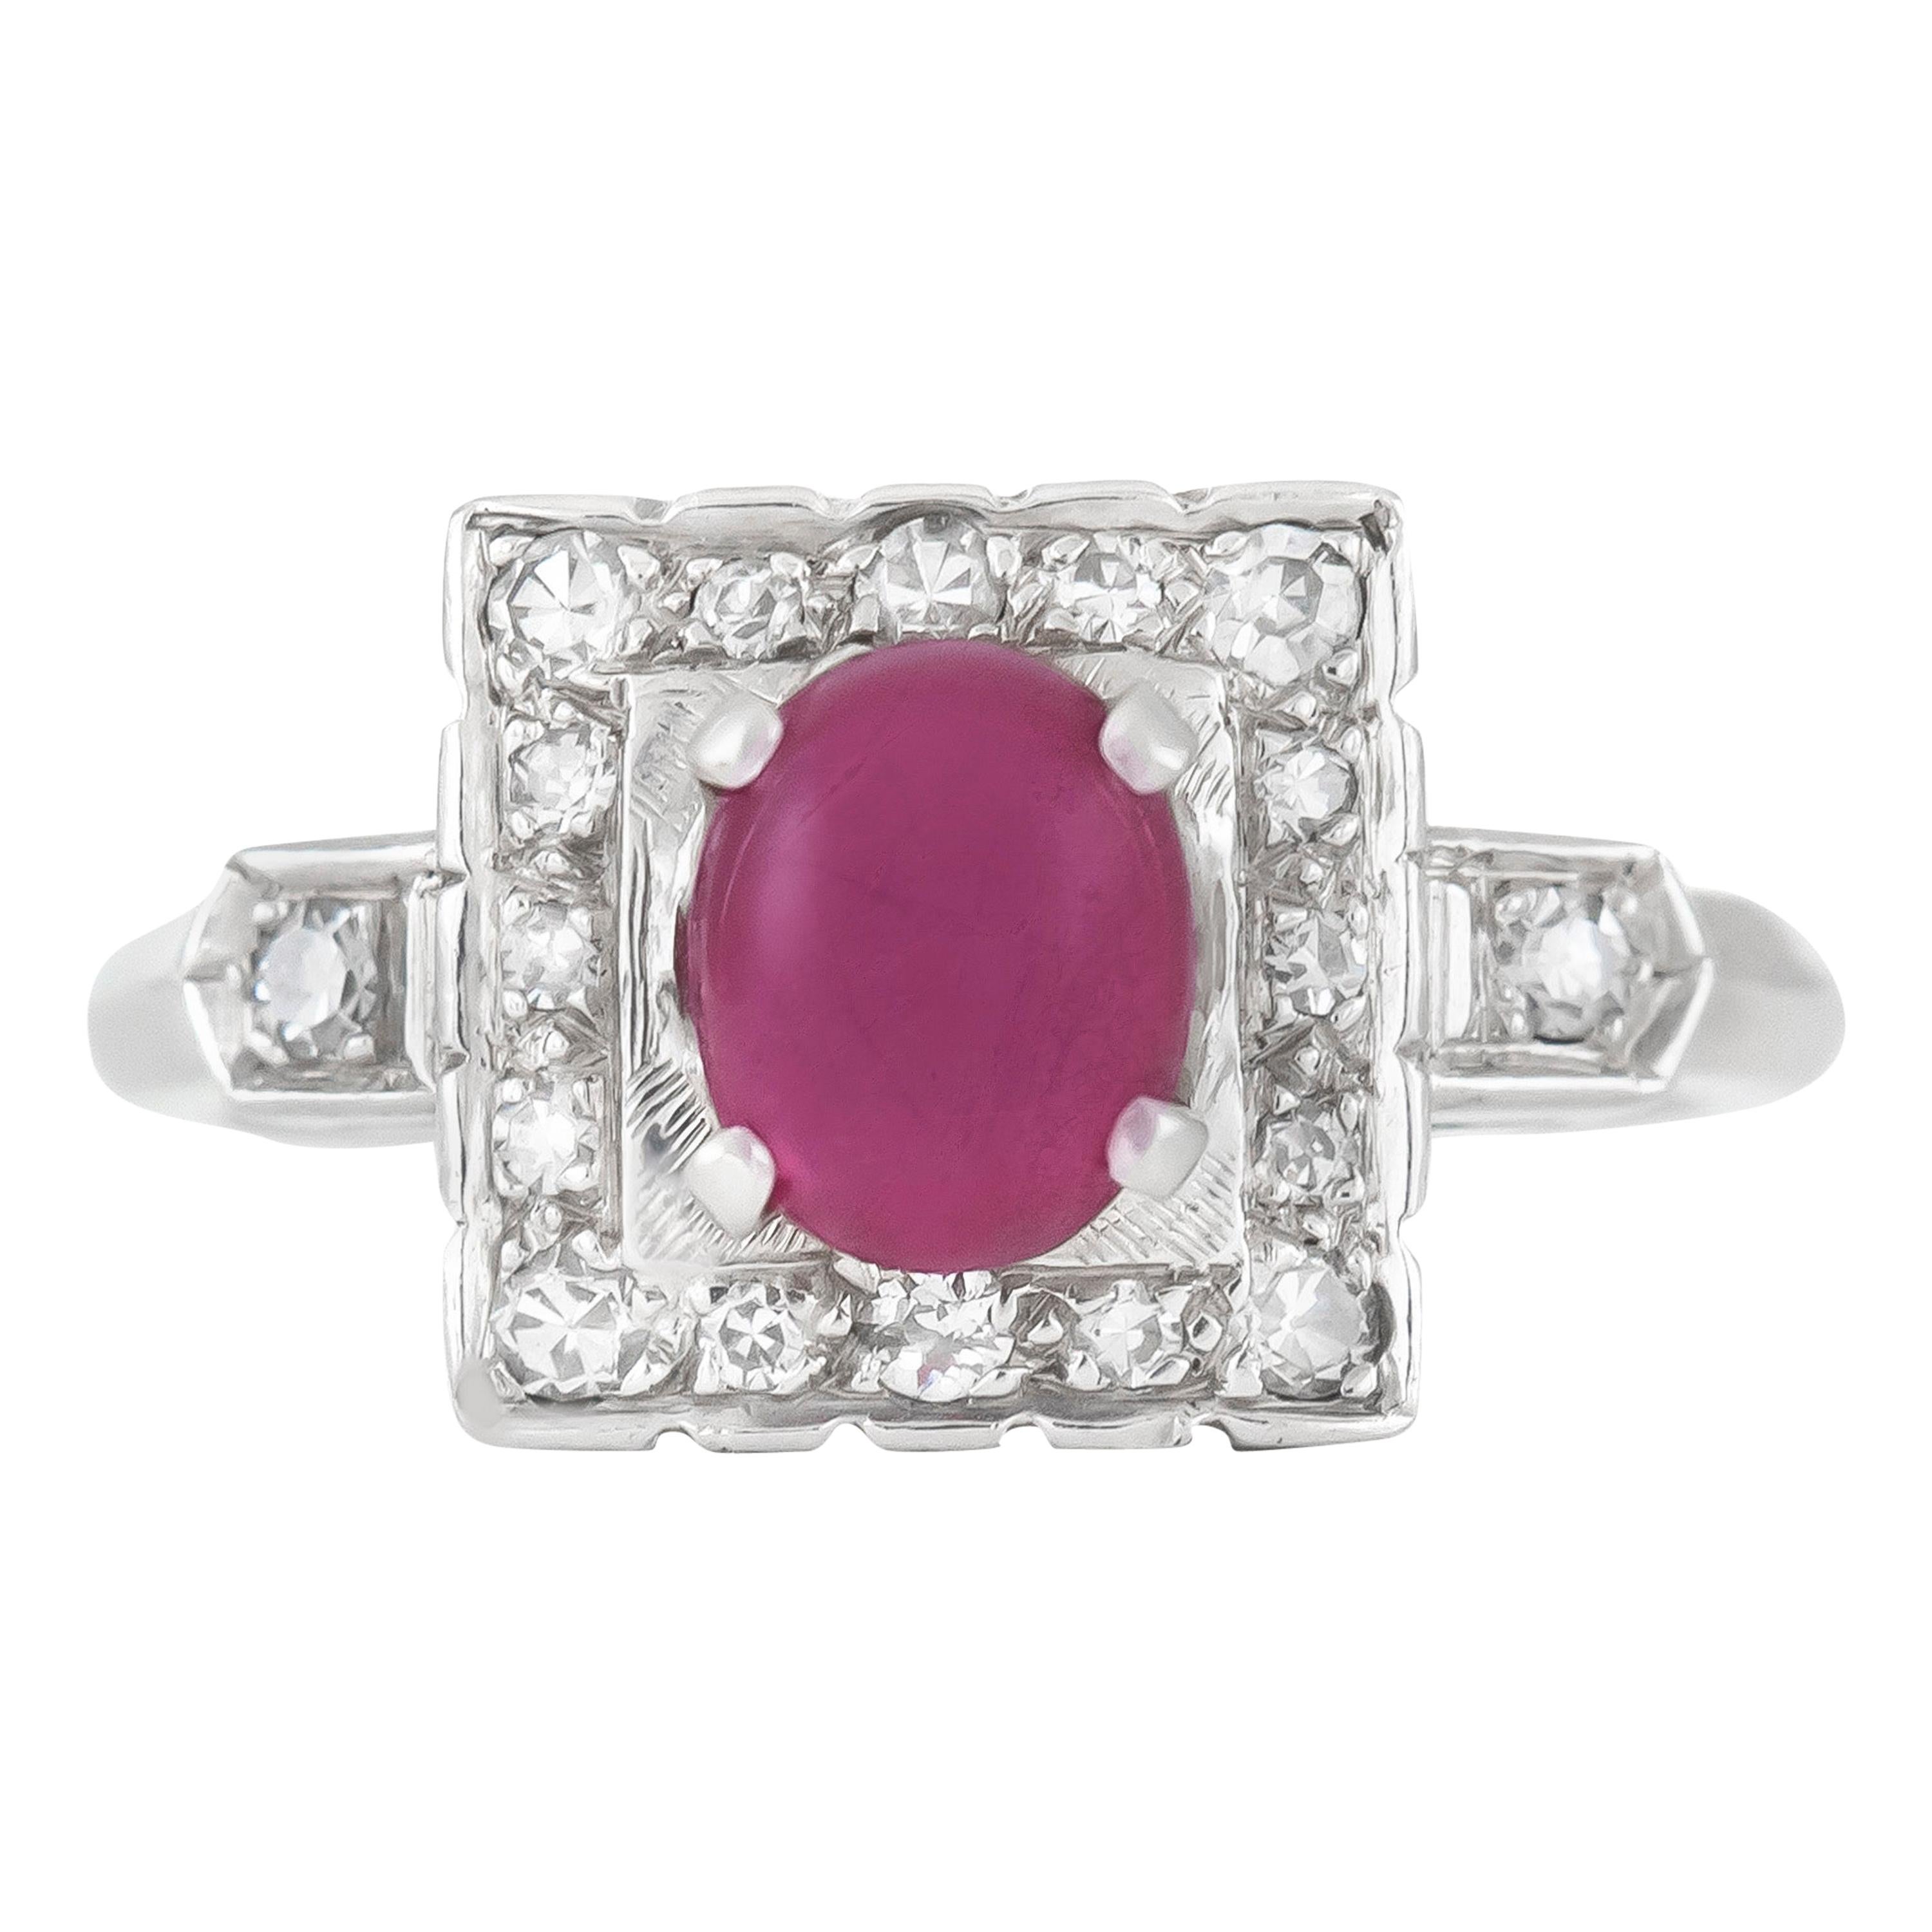 1970s Ruby Ring with Halo Setting